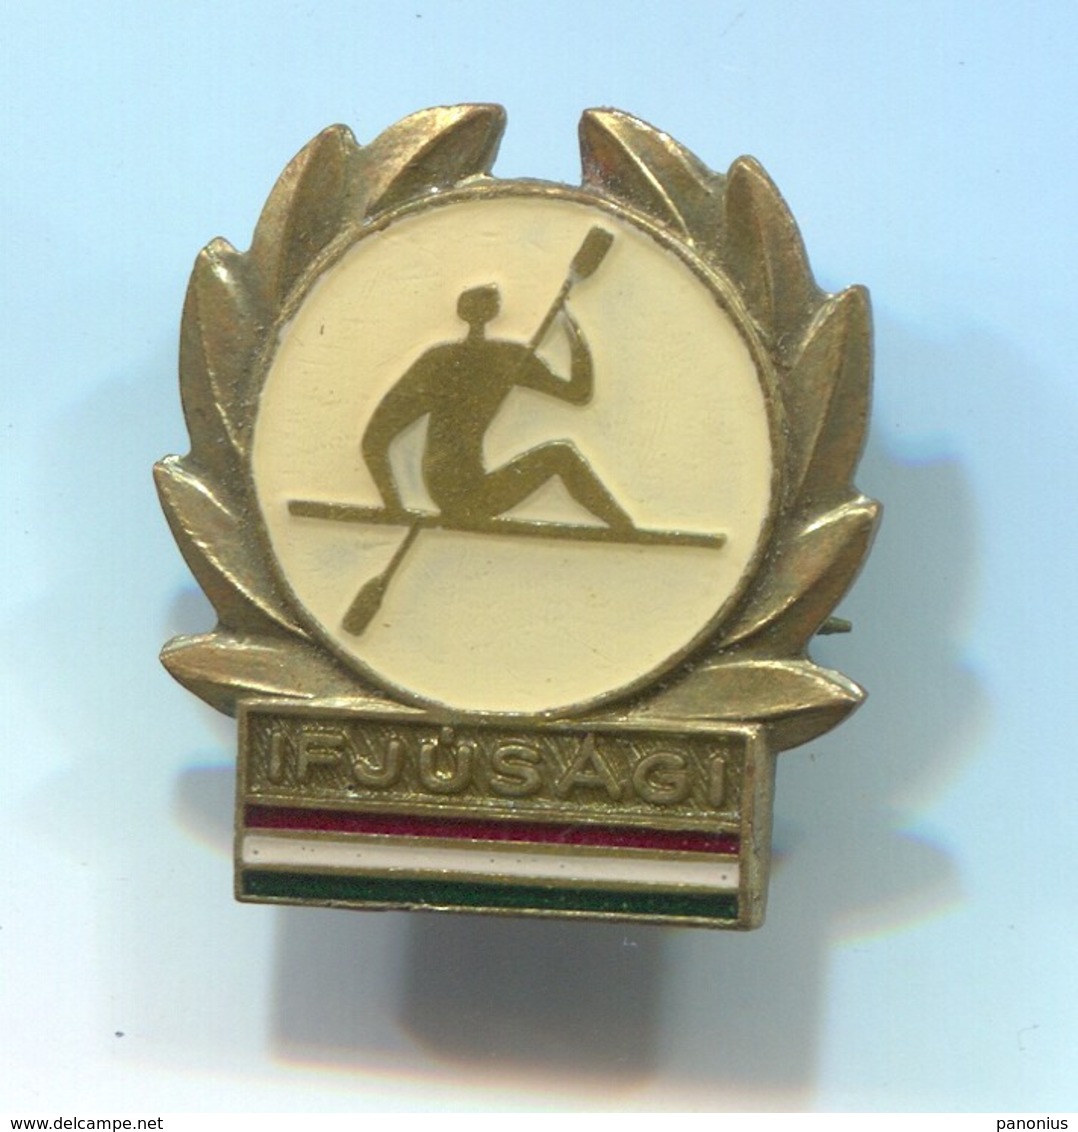 Rowing Canoe Kayak - Hungary Federation, Vintage Pin, Badge, Abzeichen - Rowing